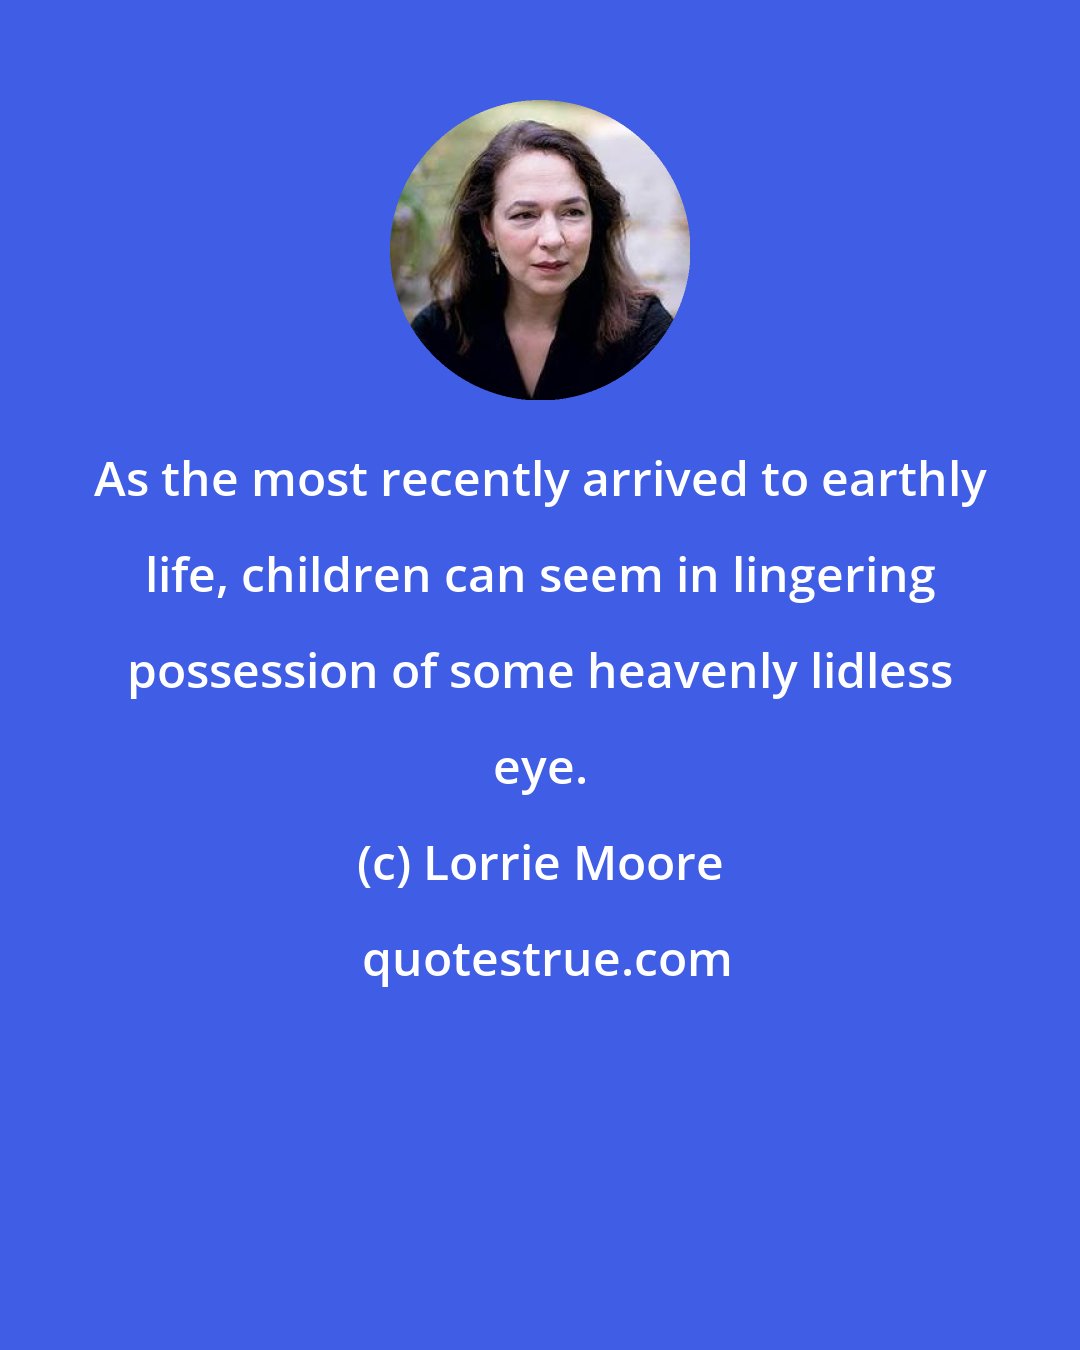 Lorrie Moore: As the most recently arrived to earthly life, children can seem in lingering possession of some heavenly lidless eye.